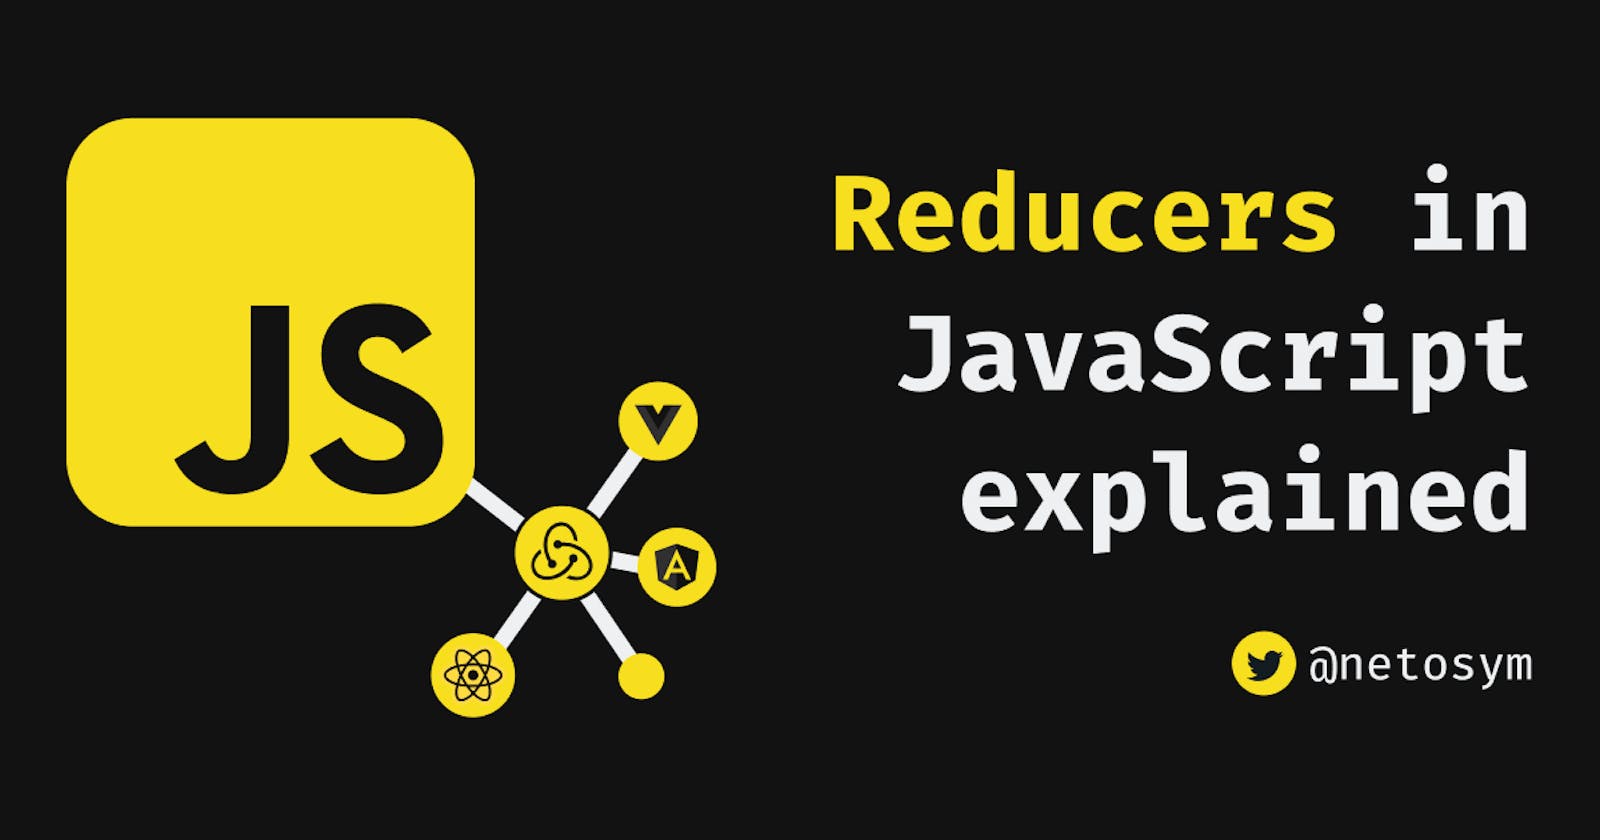 Reducers in JavaScript explained